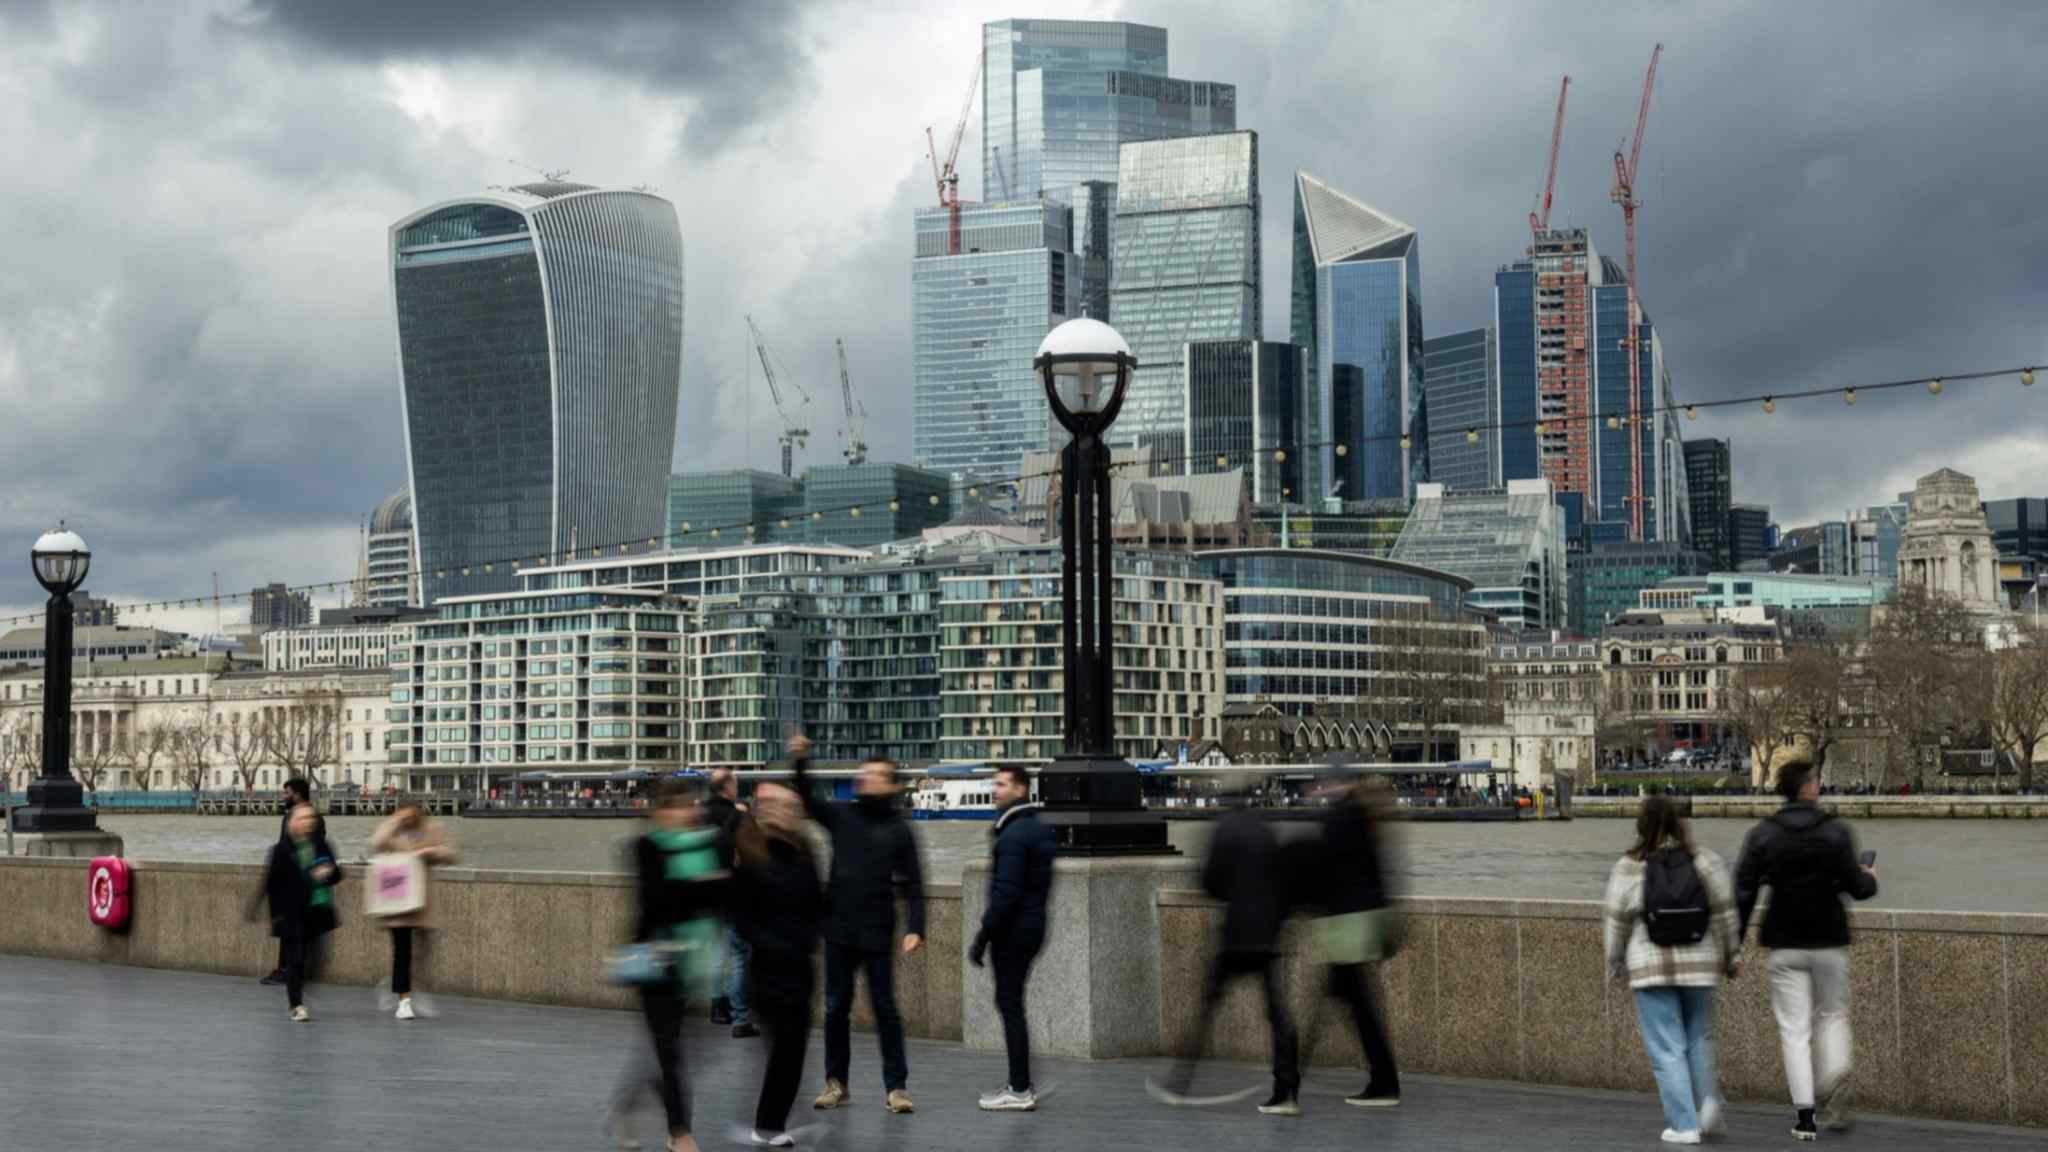 The UK needs to learn its own lessons from the banking crisis